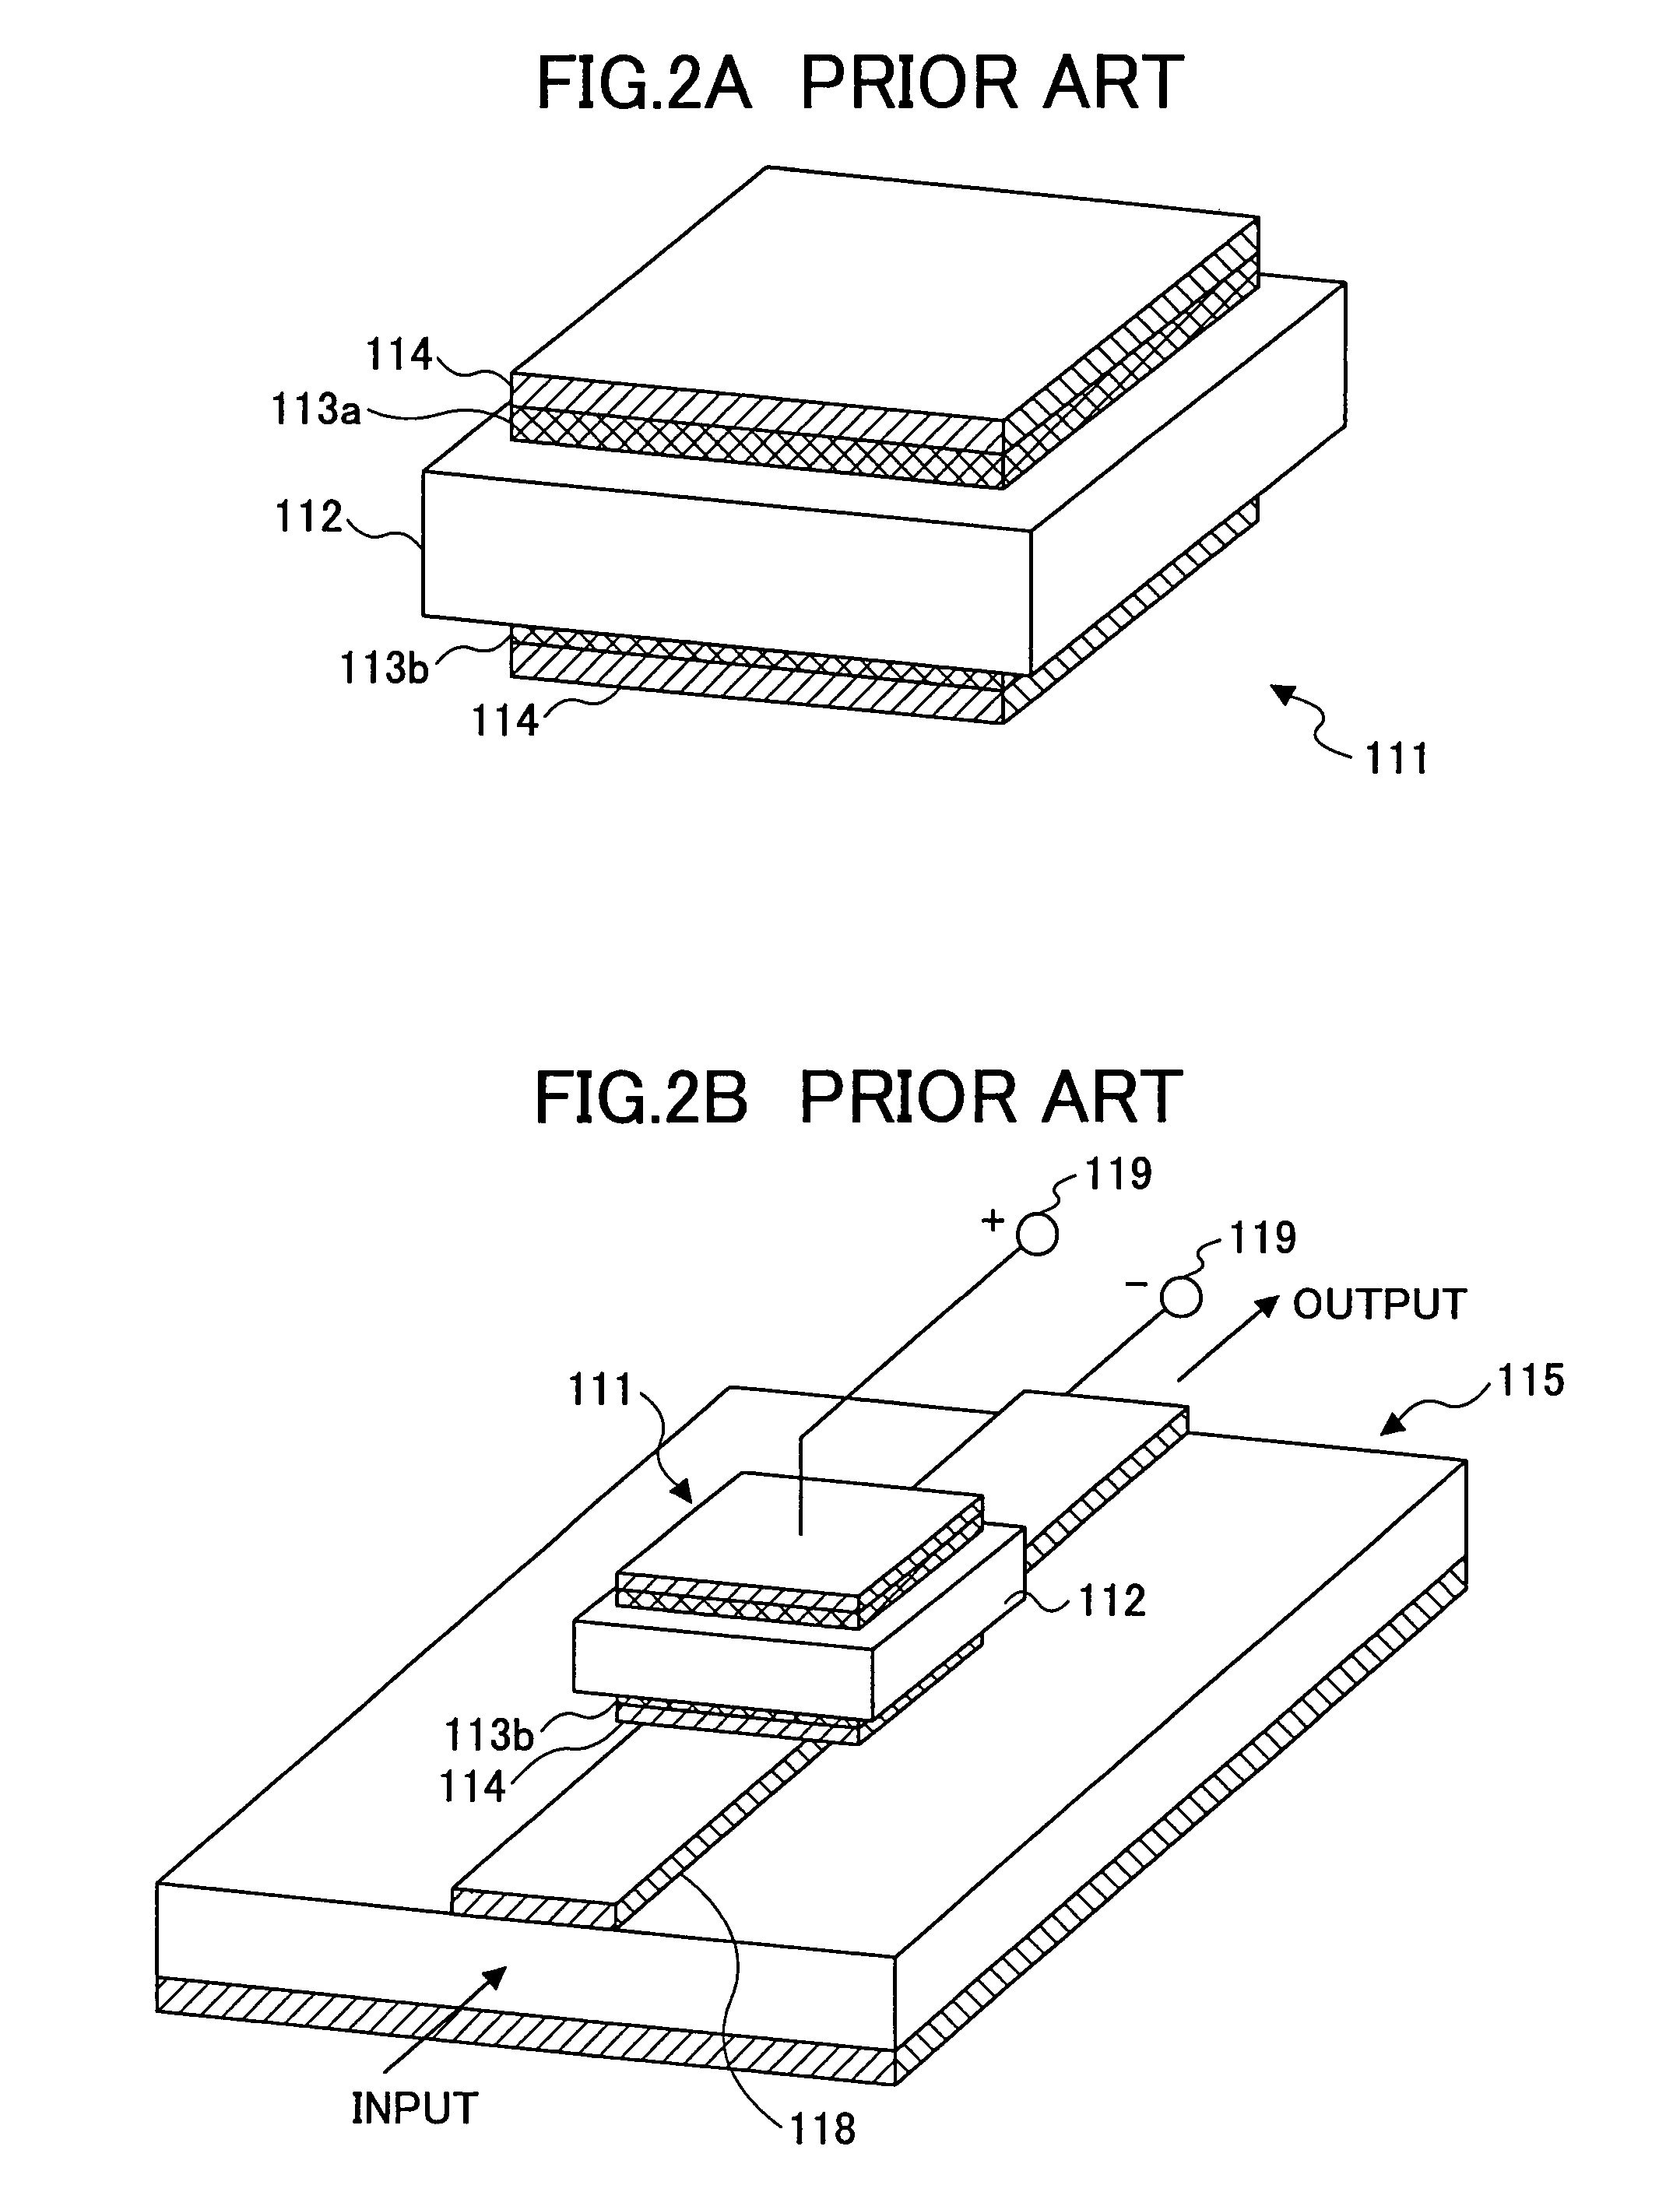 Superconducting tunable filter having a patch resonator pattern tuned by a variable dielectric constant top plate